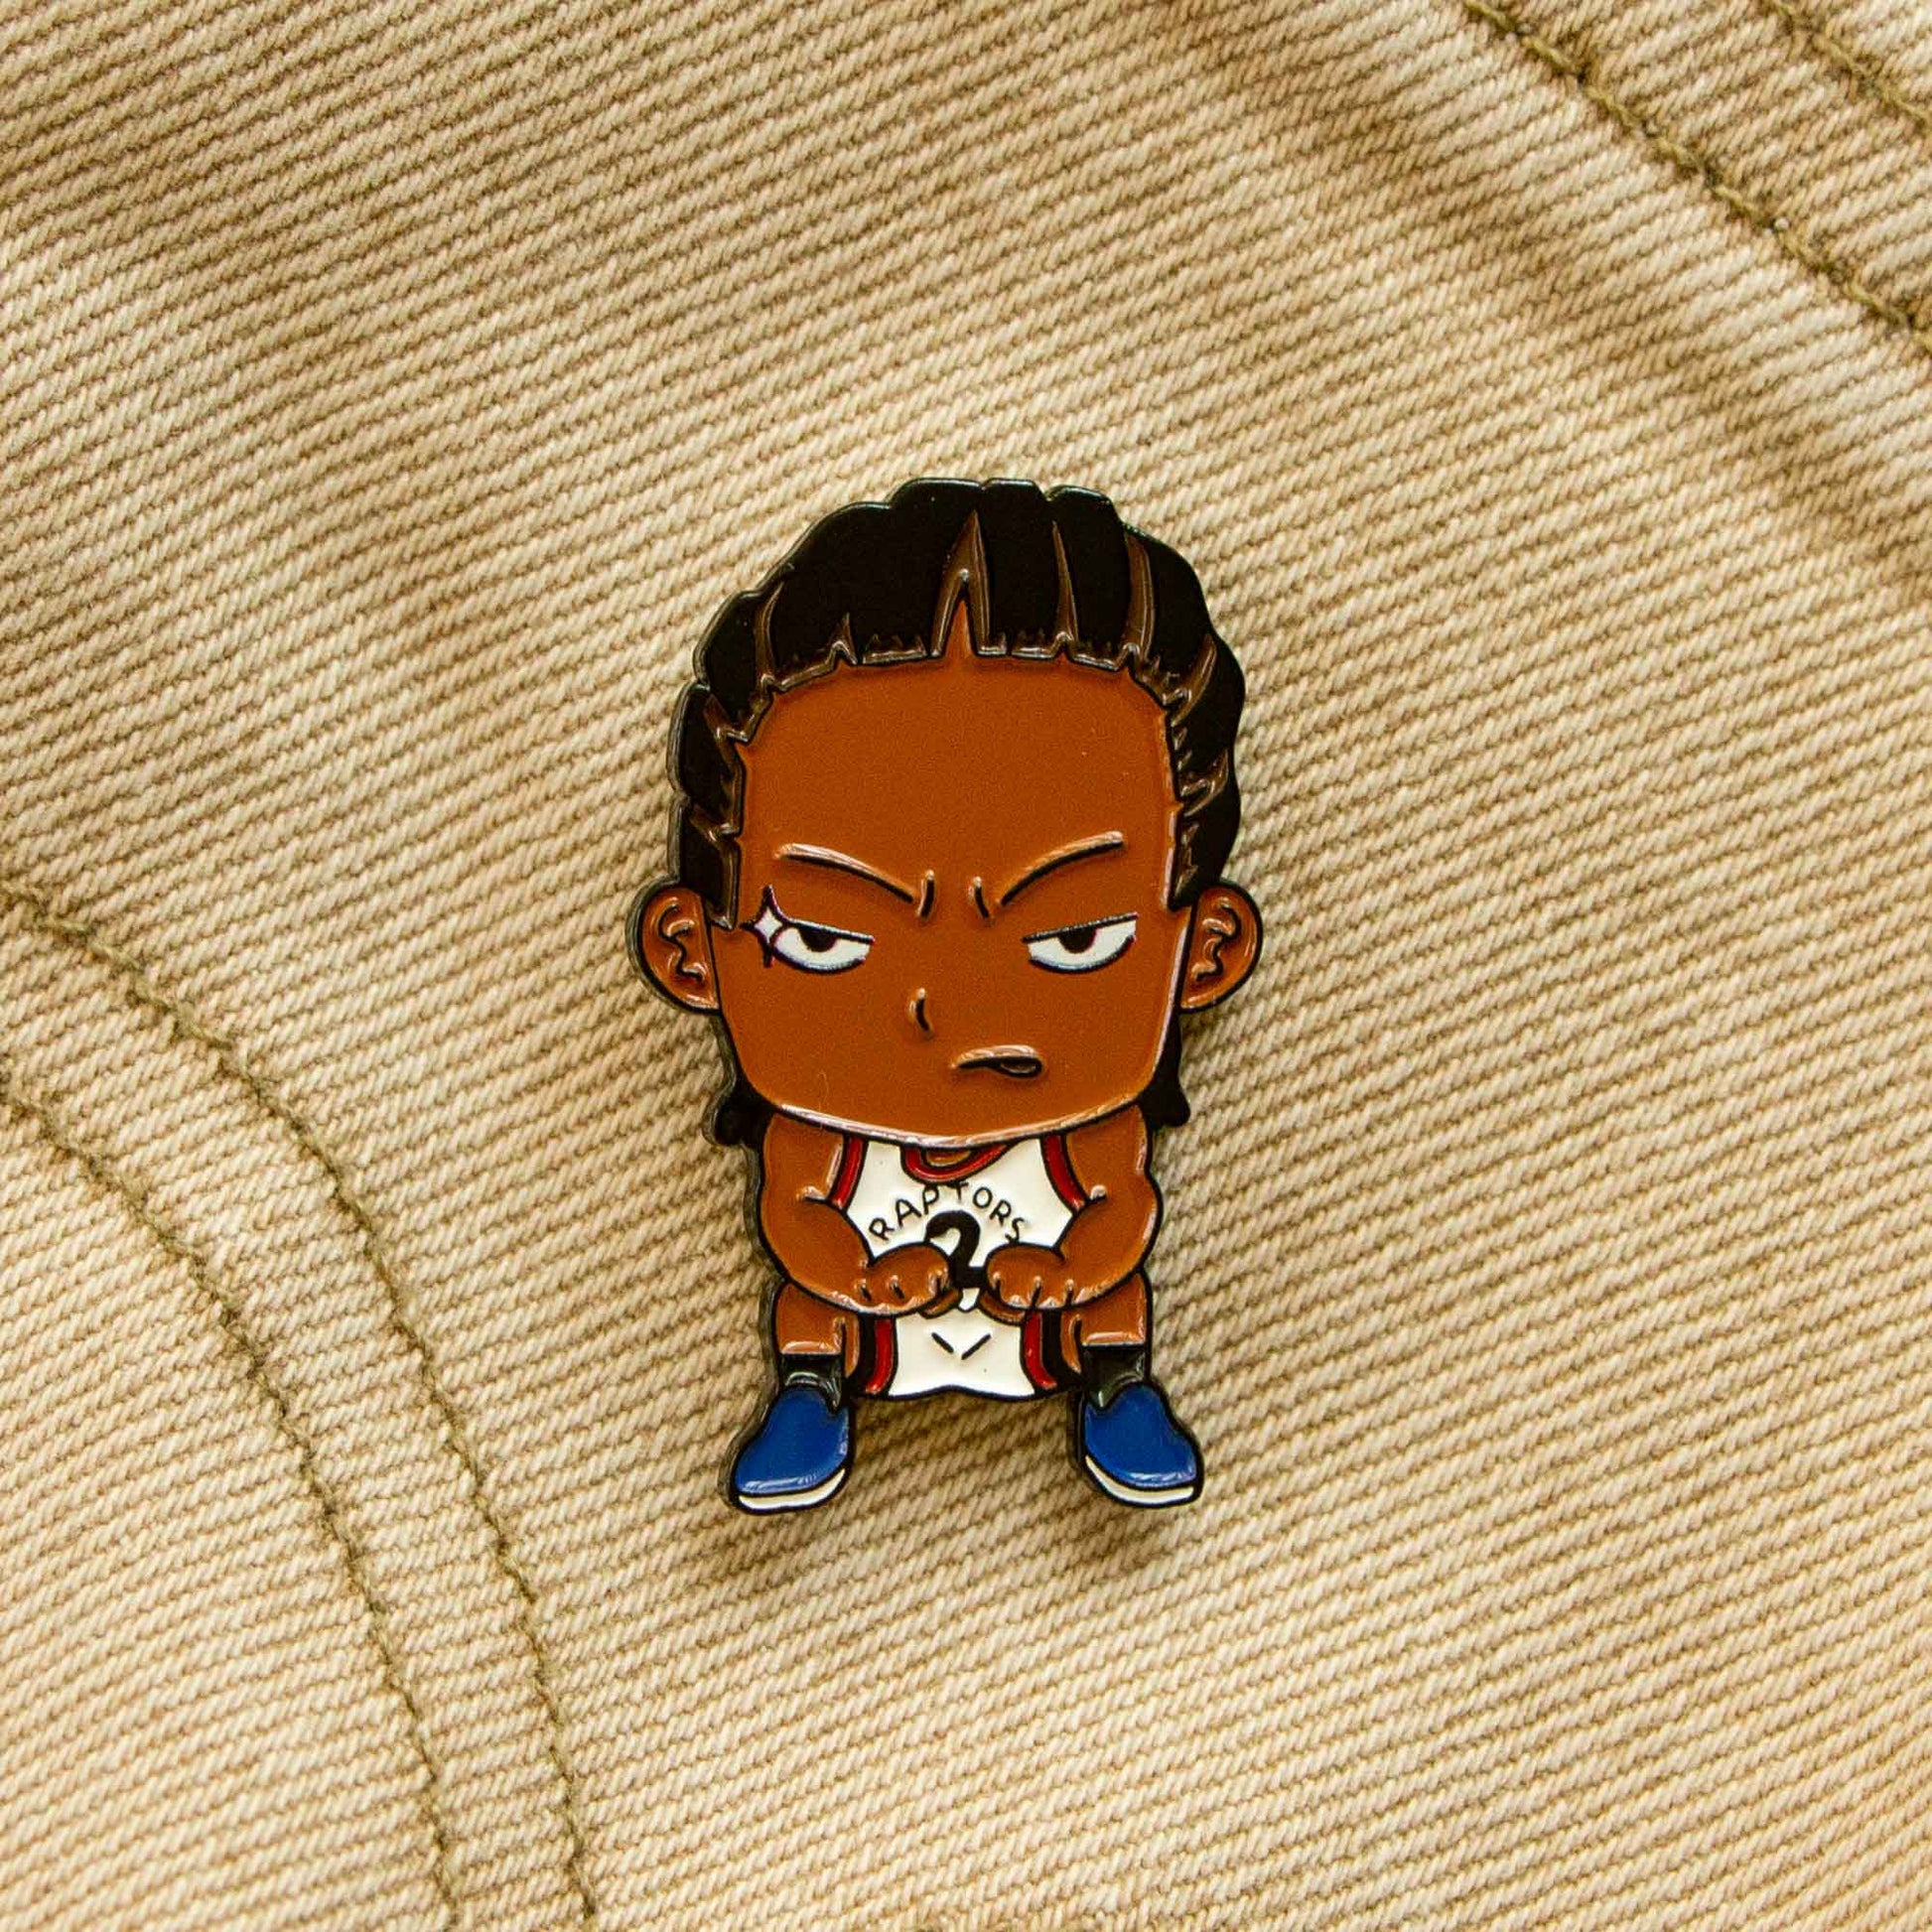 An enamel pin of the Kawhi Leonard squat from the game 7 buzzer beater against the Philadelphia 76ers.